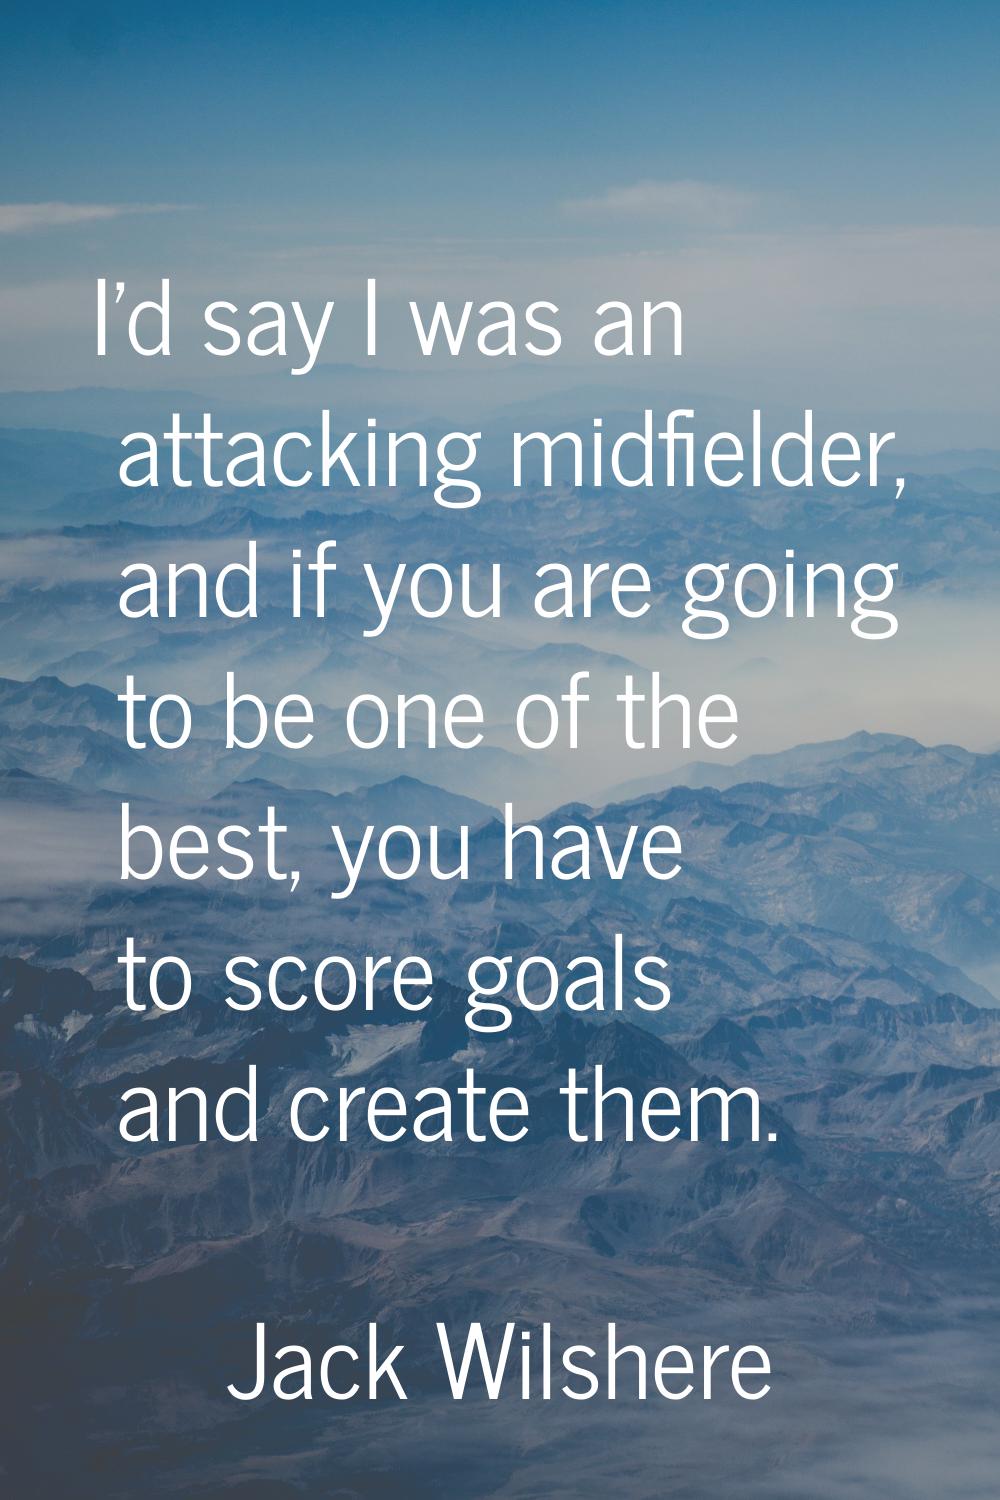 I'd say I was an attacking midfielder, and if you are going to be one of the best, you have to scor